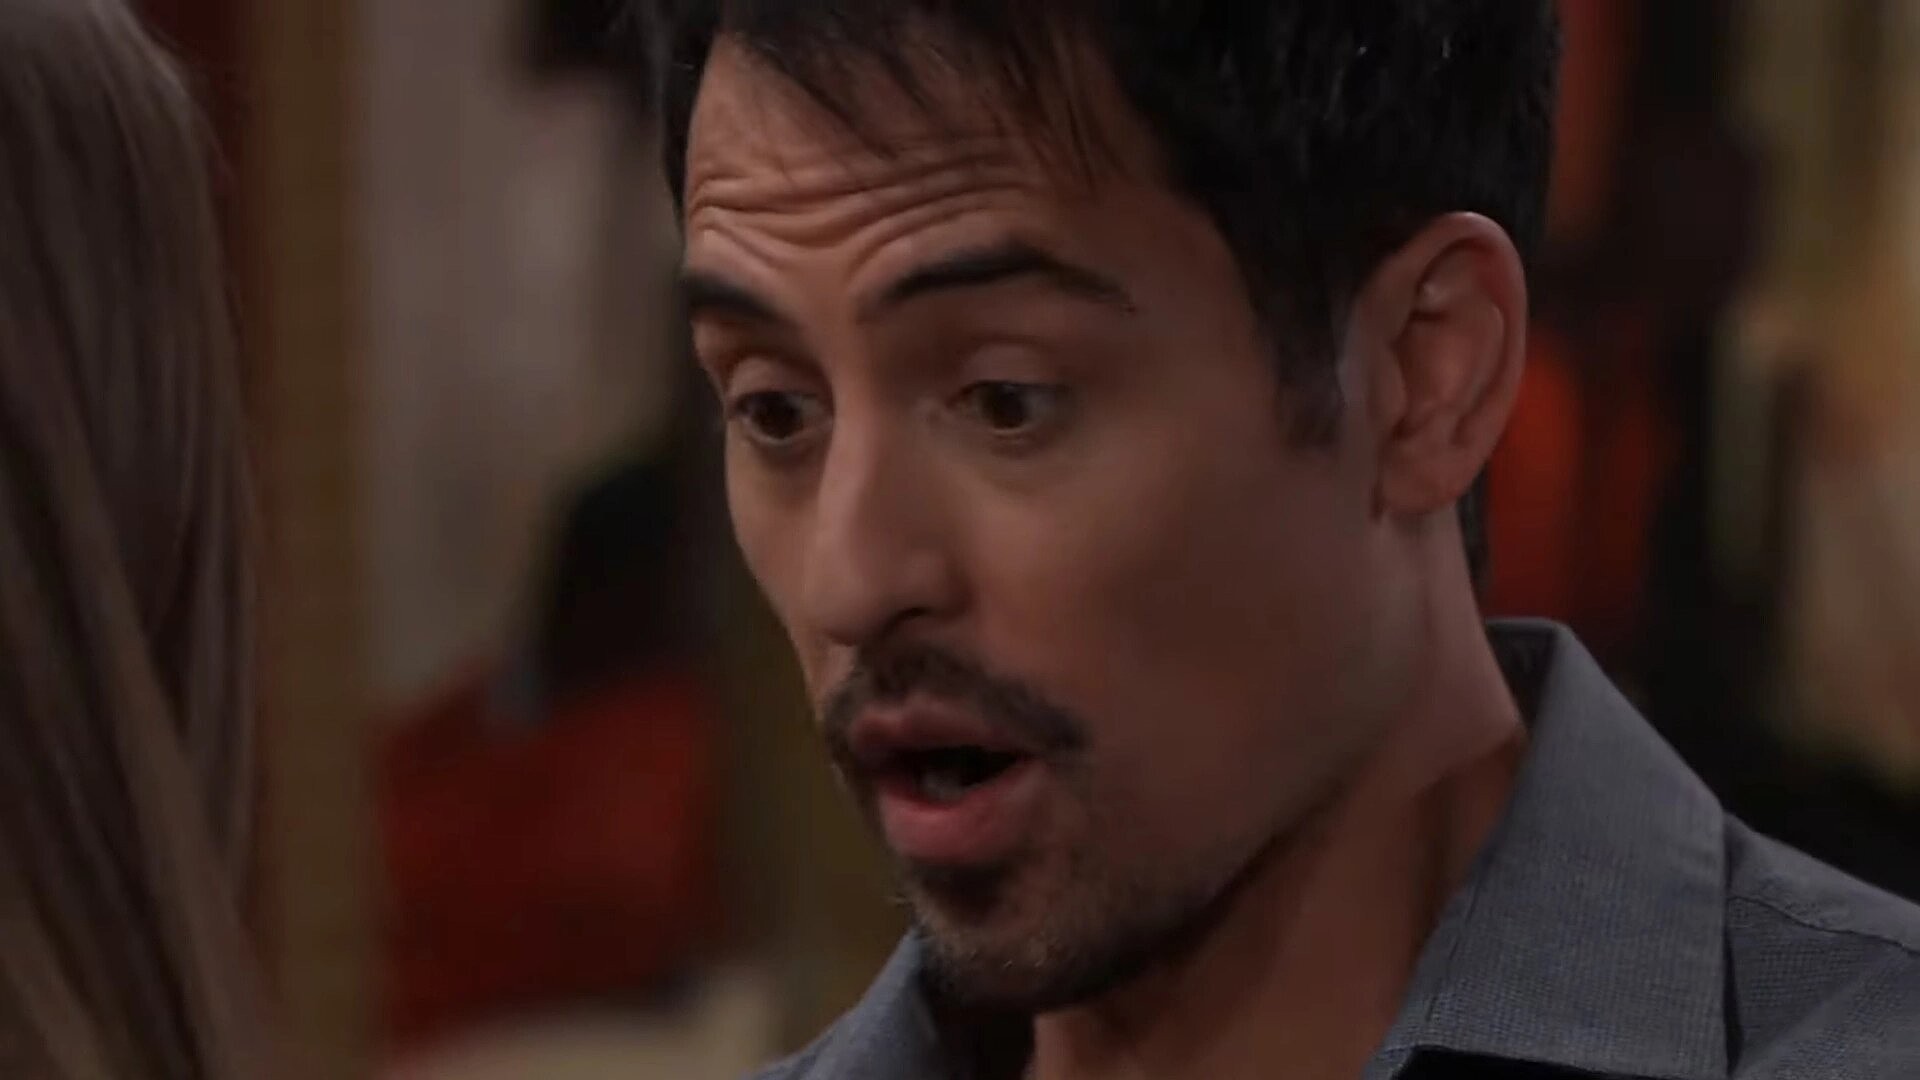 GH/Marcus Coloma's redemption storyline?